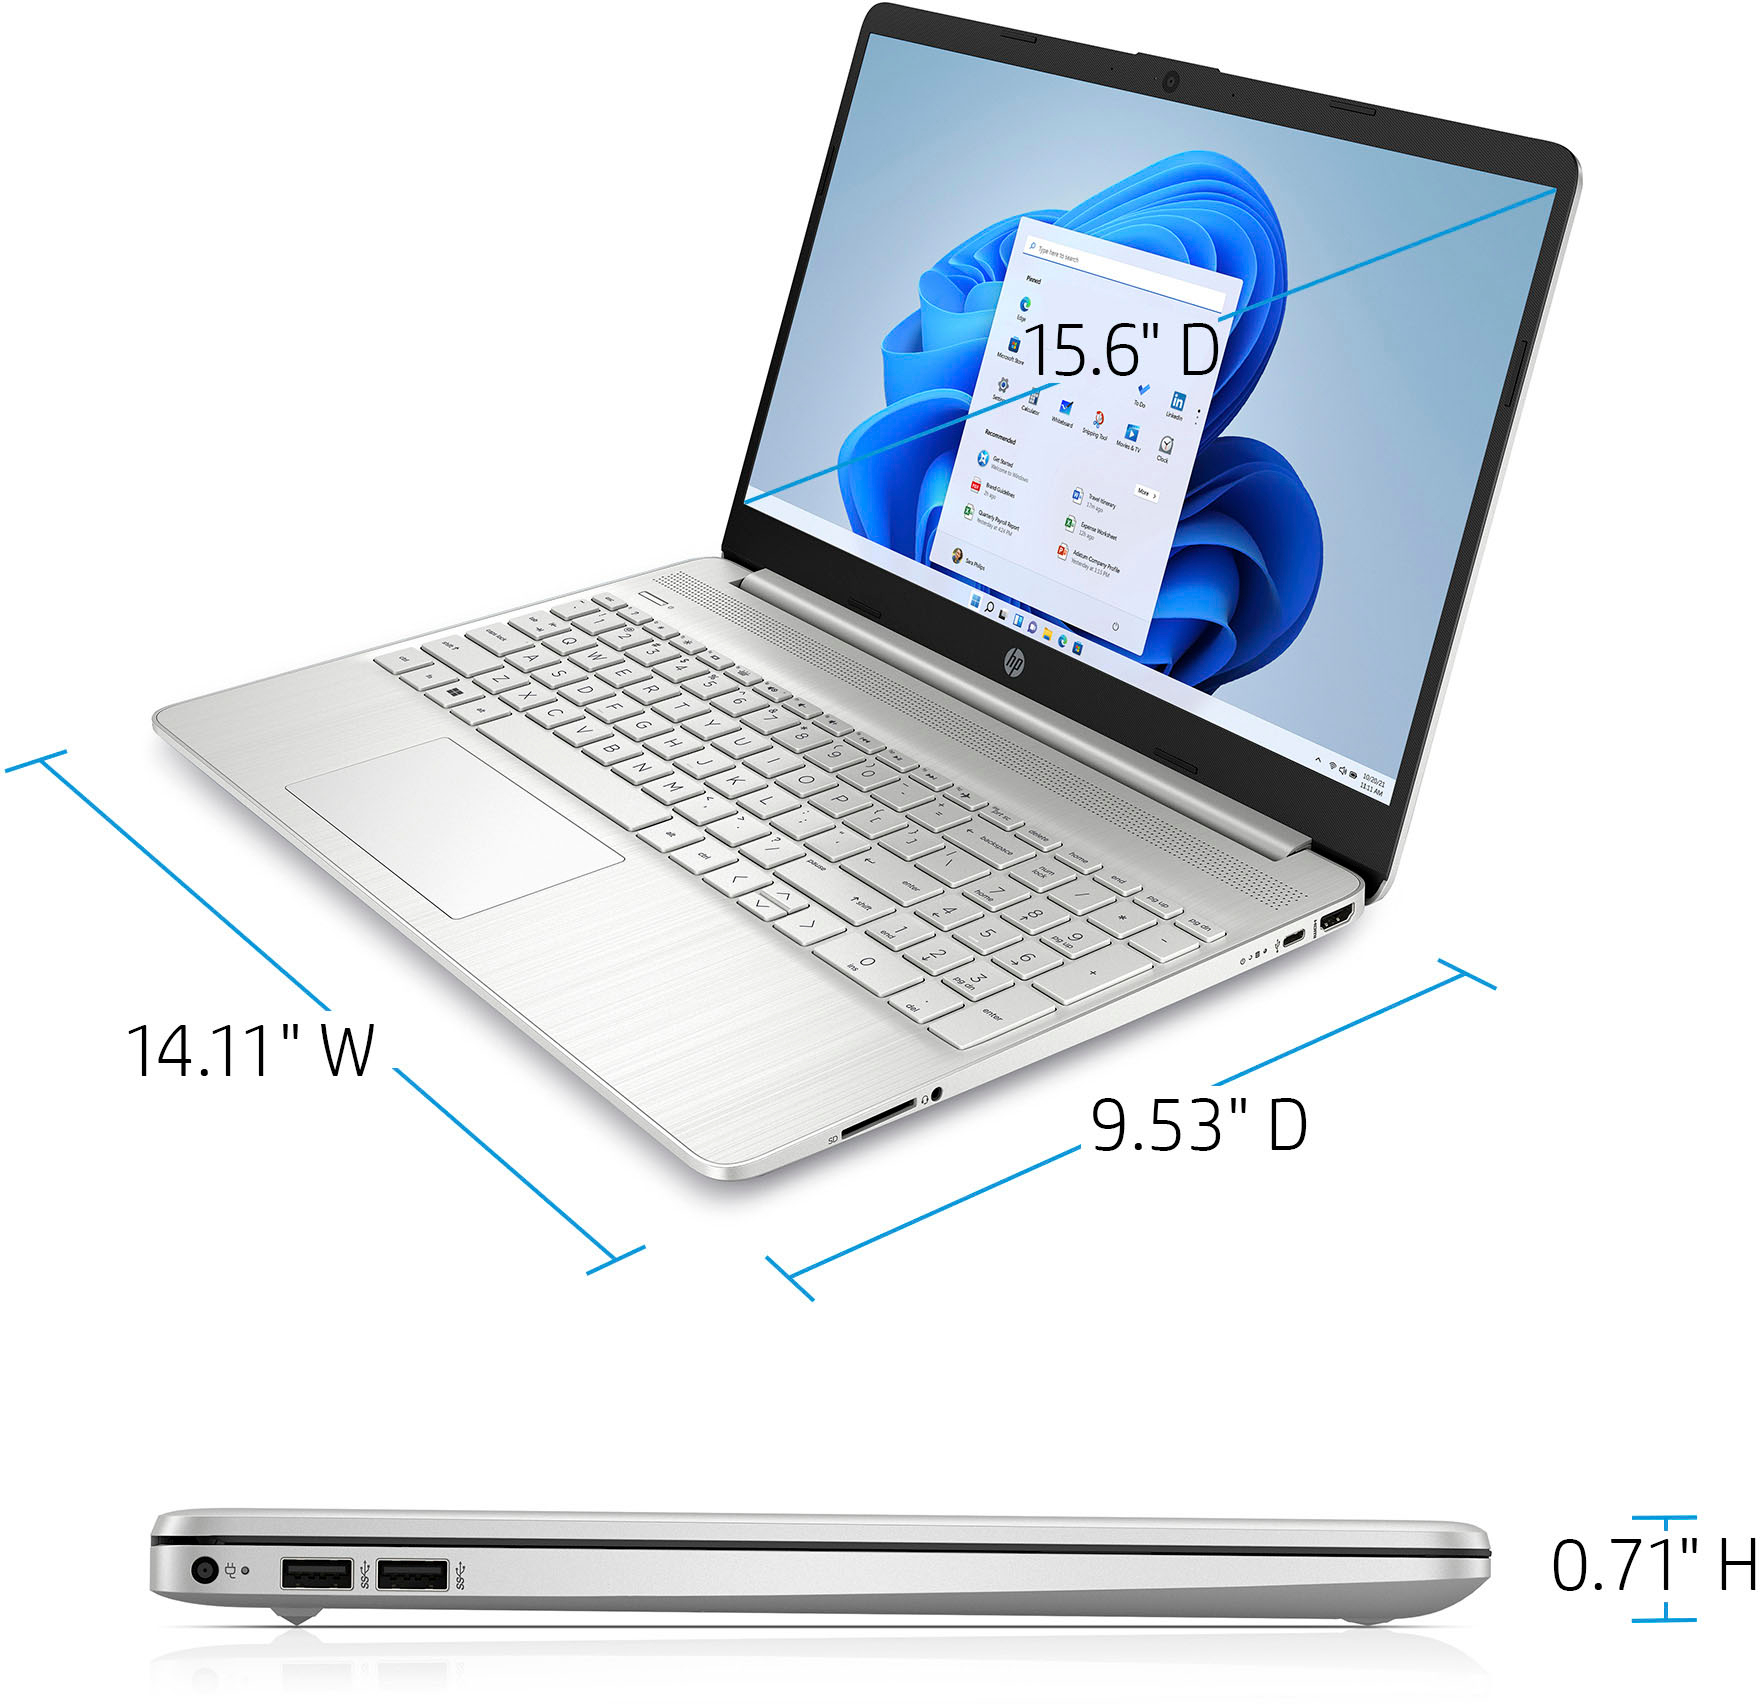 HP 15.6" Touch-Screen Laptop Intel Core i3 Memory 256GB SSD Natural Silver 15-dy2702dx - Best Buy